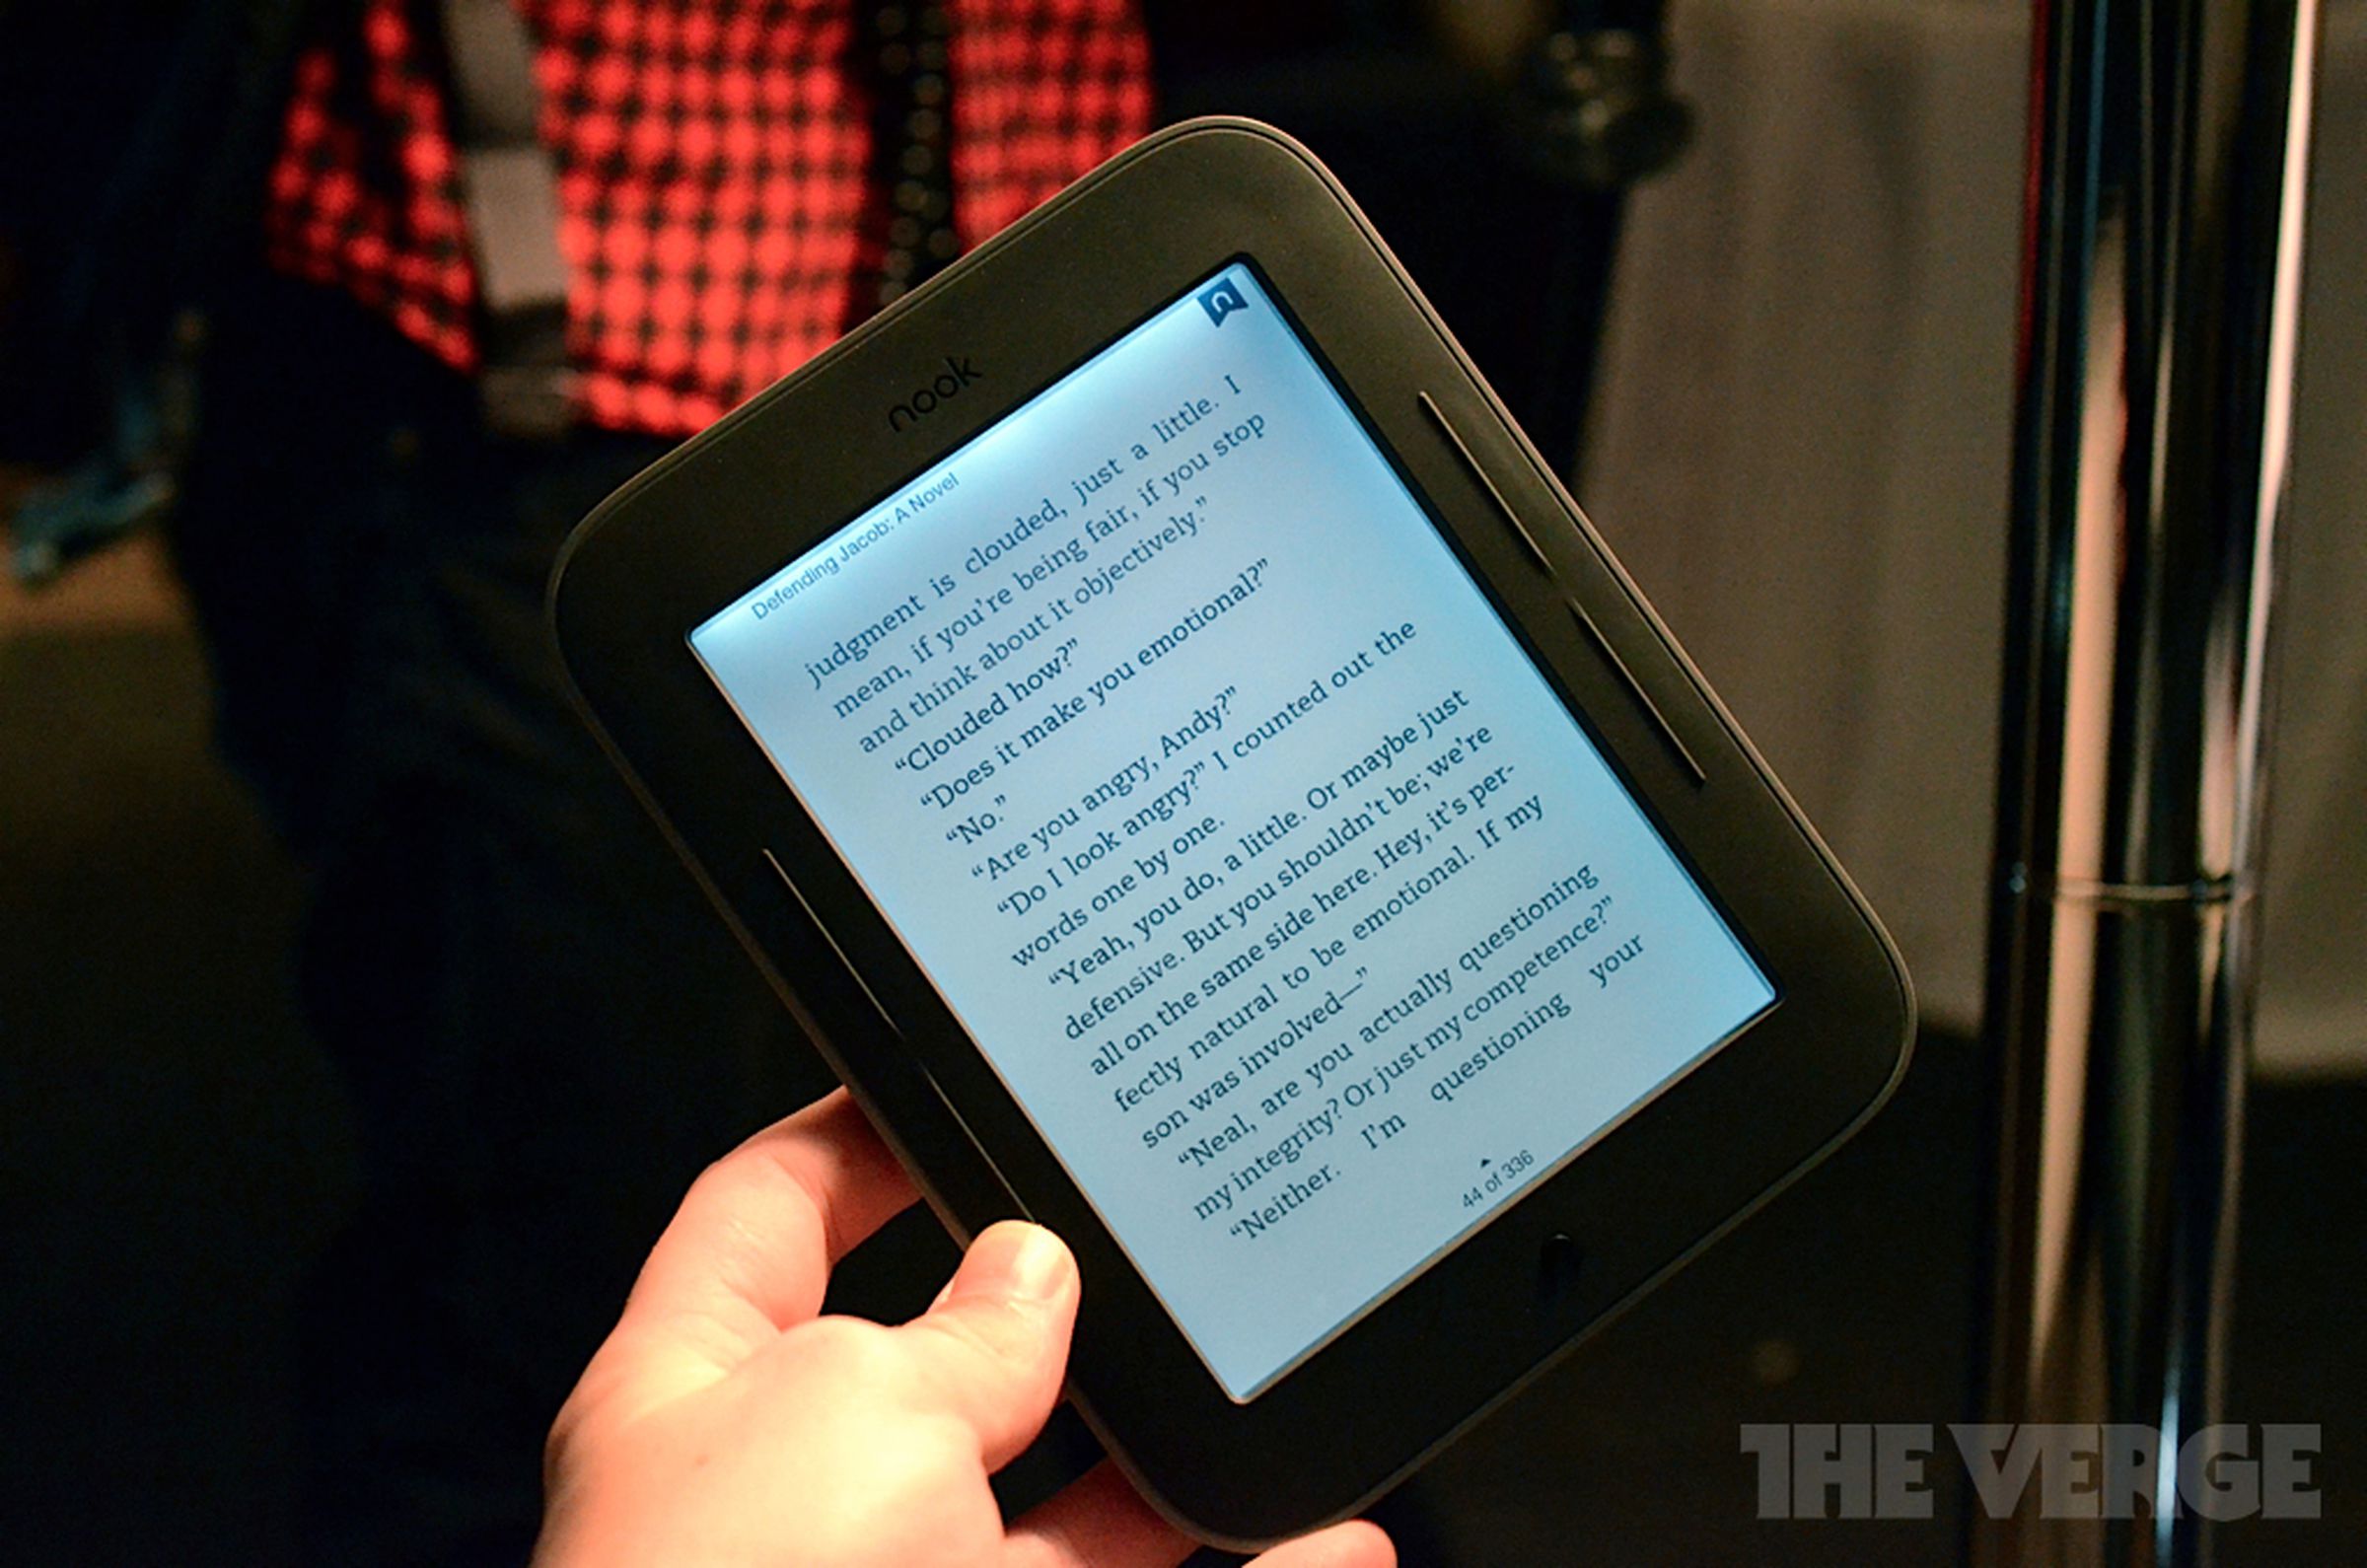 Barnes & Noble Nook Simple Touch with GlowLight hands-on pictures